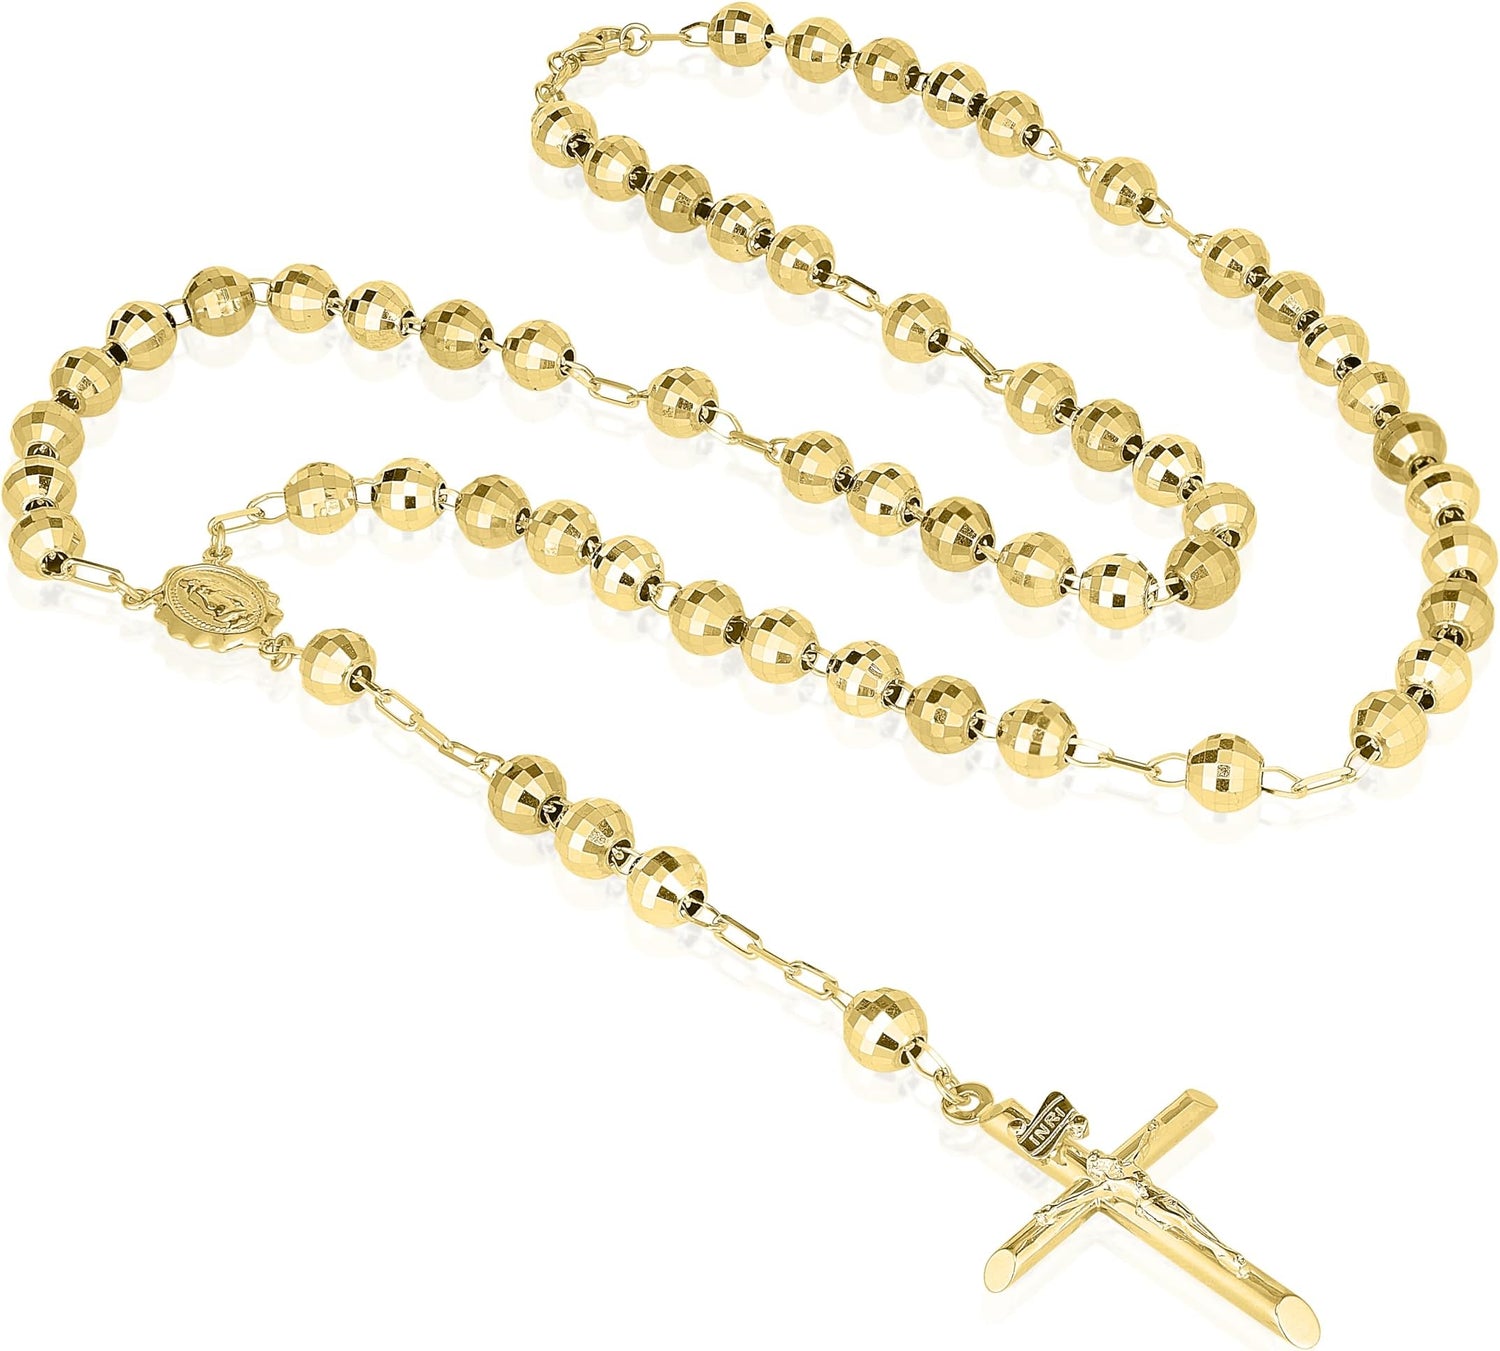 10k Yellow Gold or Tri Color 6mm Rosary with Virgin Mary Medal and Crucifix of Jesus Cross Pendant Chain Necklace